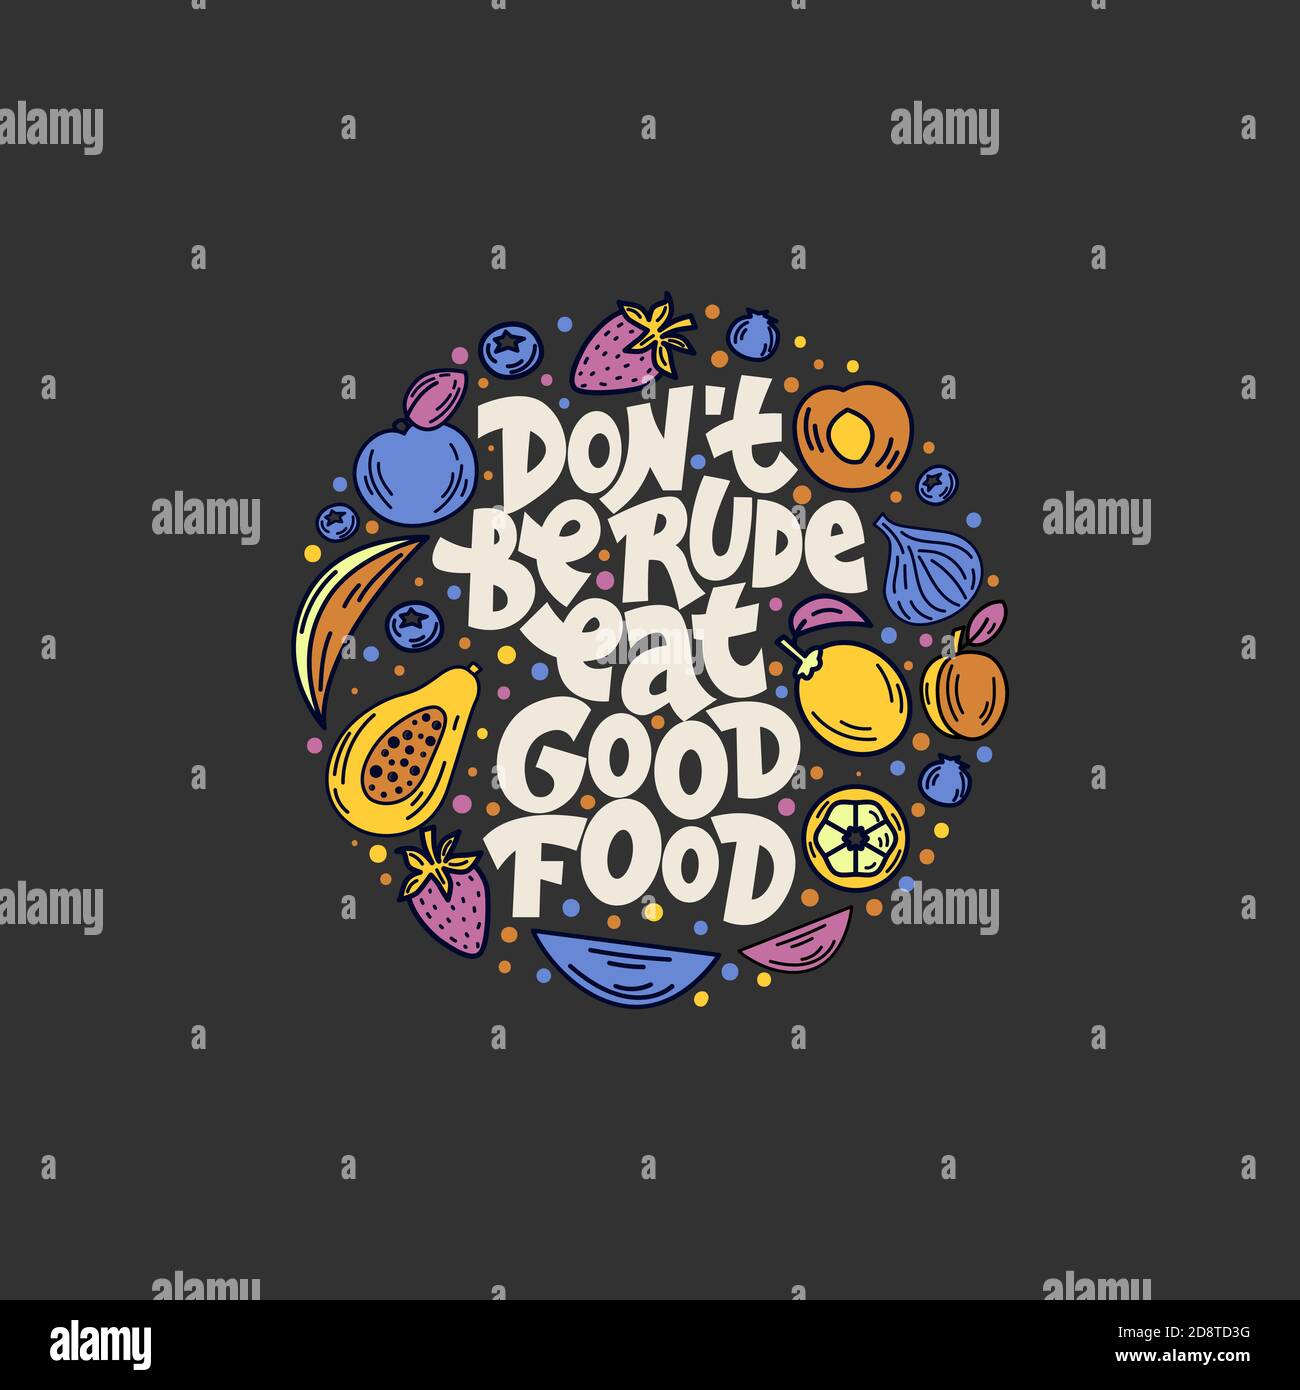 Don't be rude eat good food. Hand-drawn lettering color quote on the dark background. Inspiring phrase about healthy food. For poster, banner, print. Stock Vector